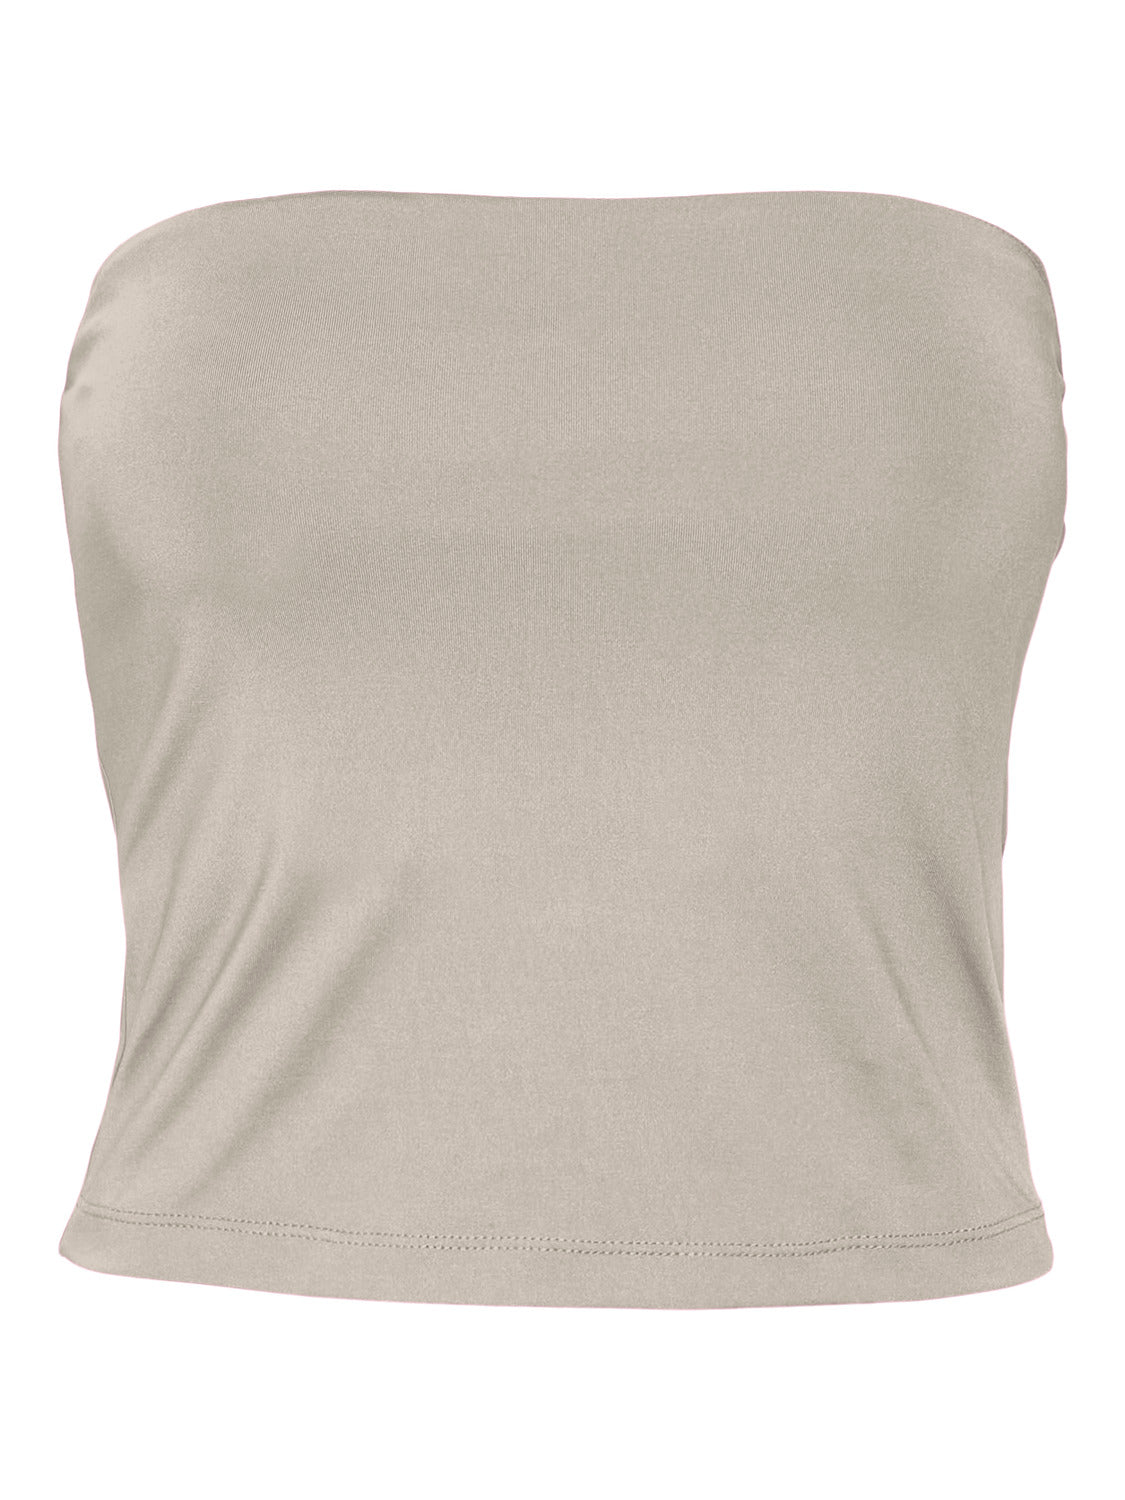 VMBIANCA Tube Top - Silver Lining